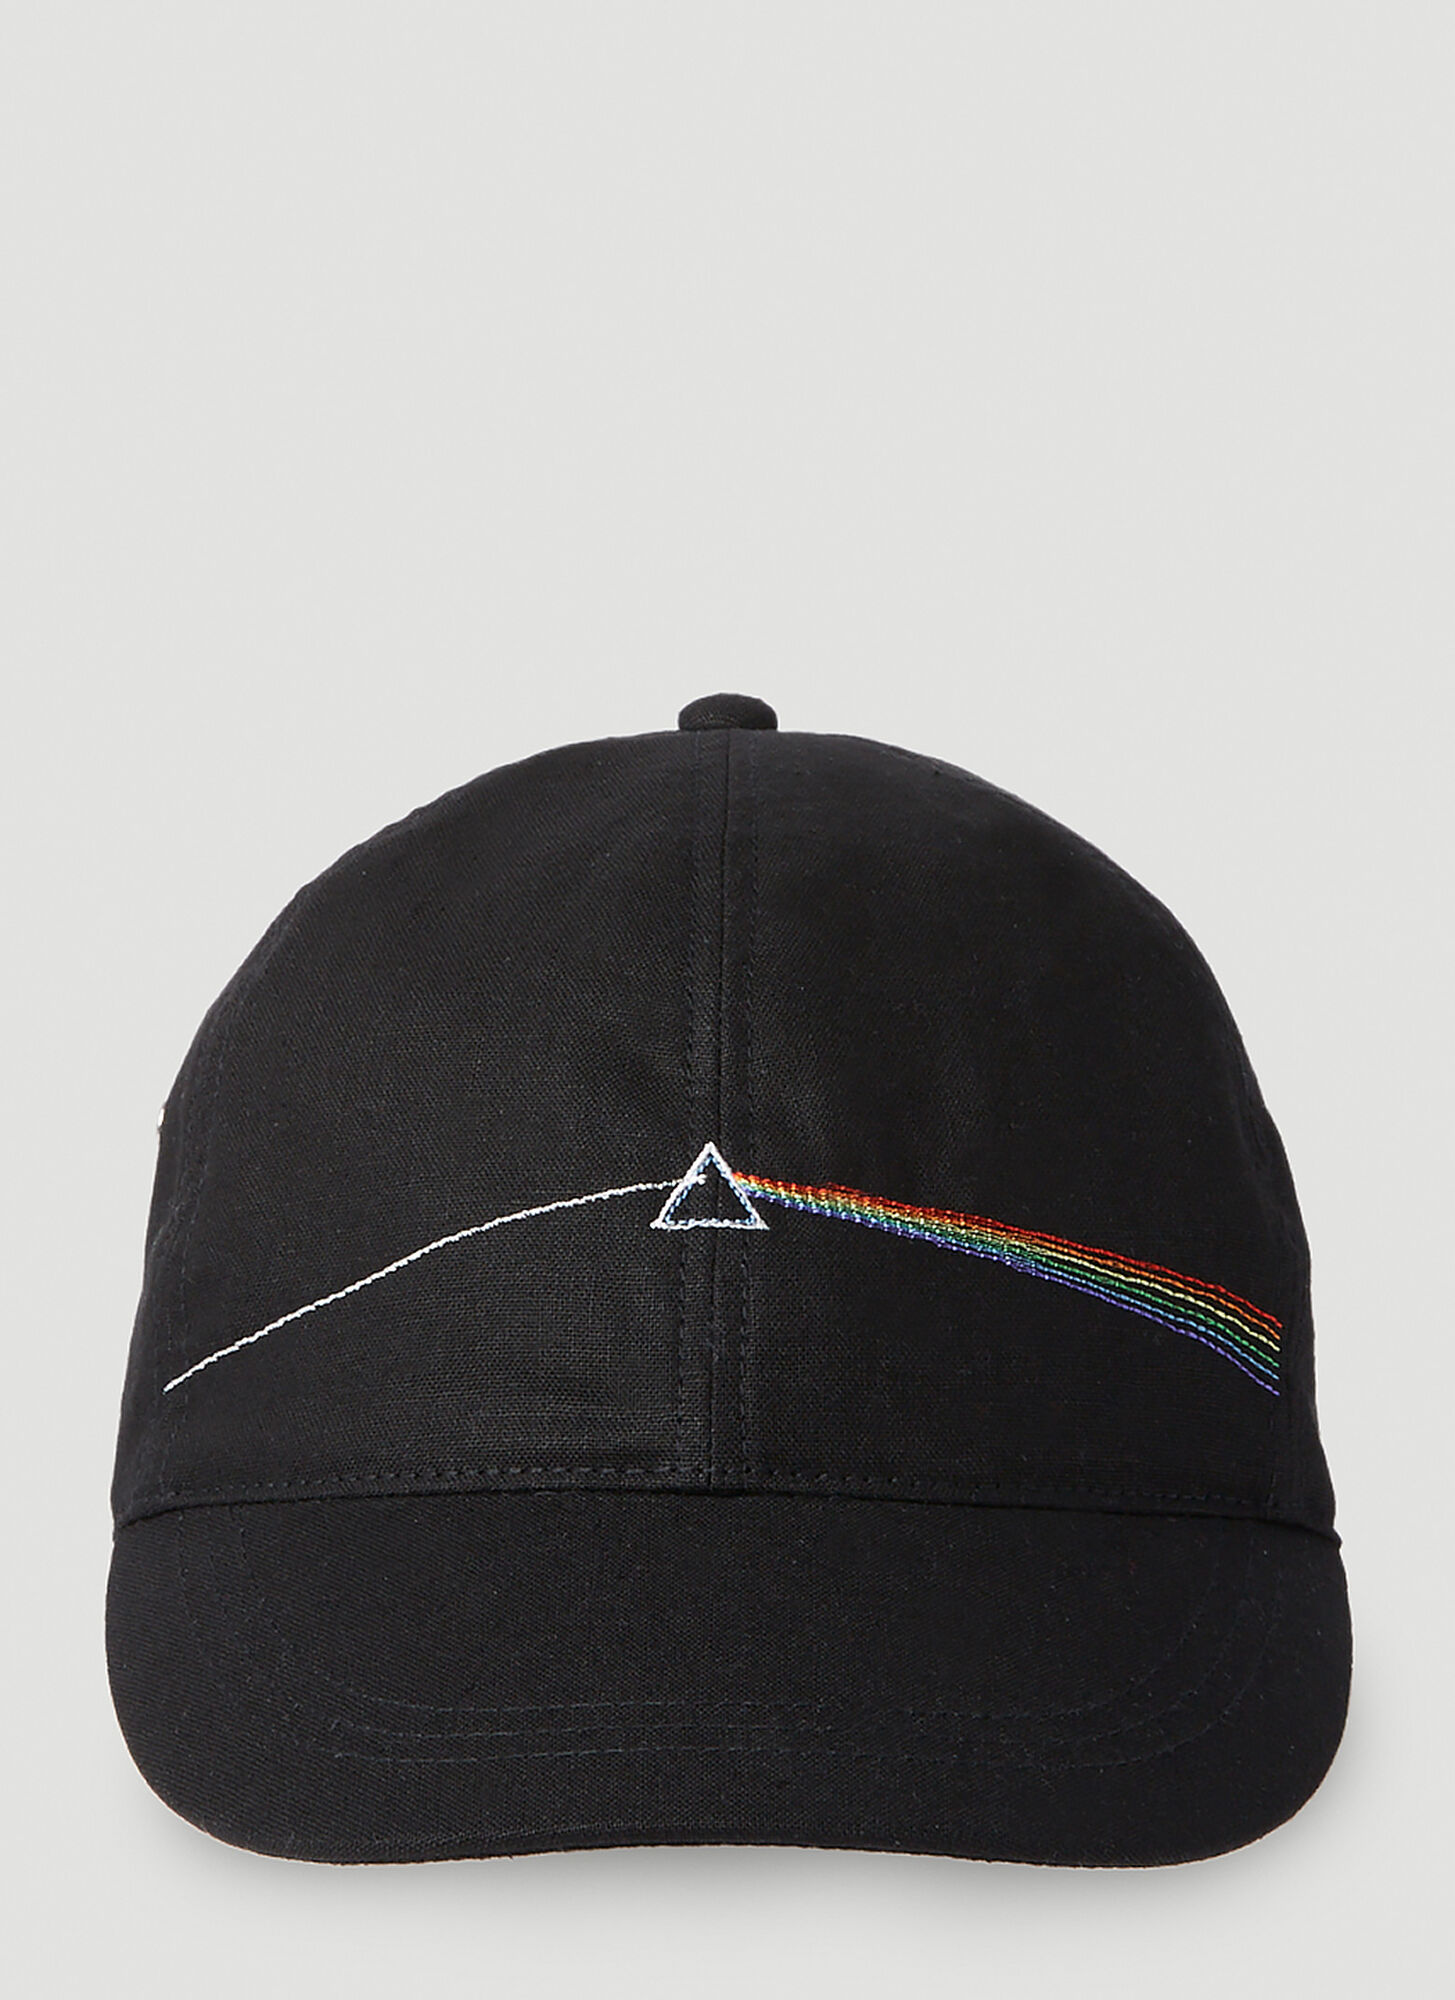 Undercover Dark Side Of The Moon Embroidered Baseball Cap In Black